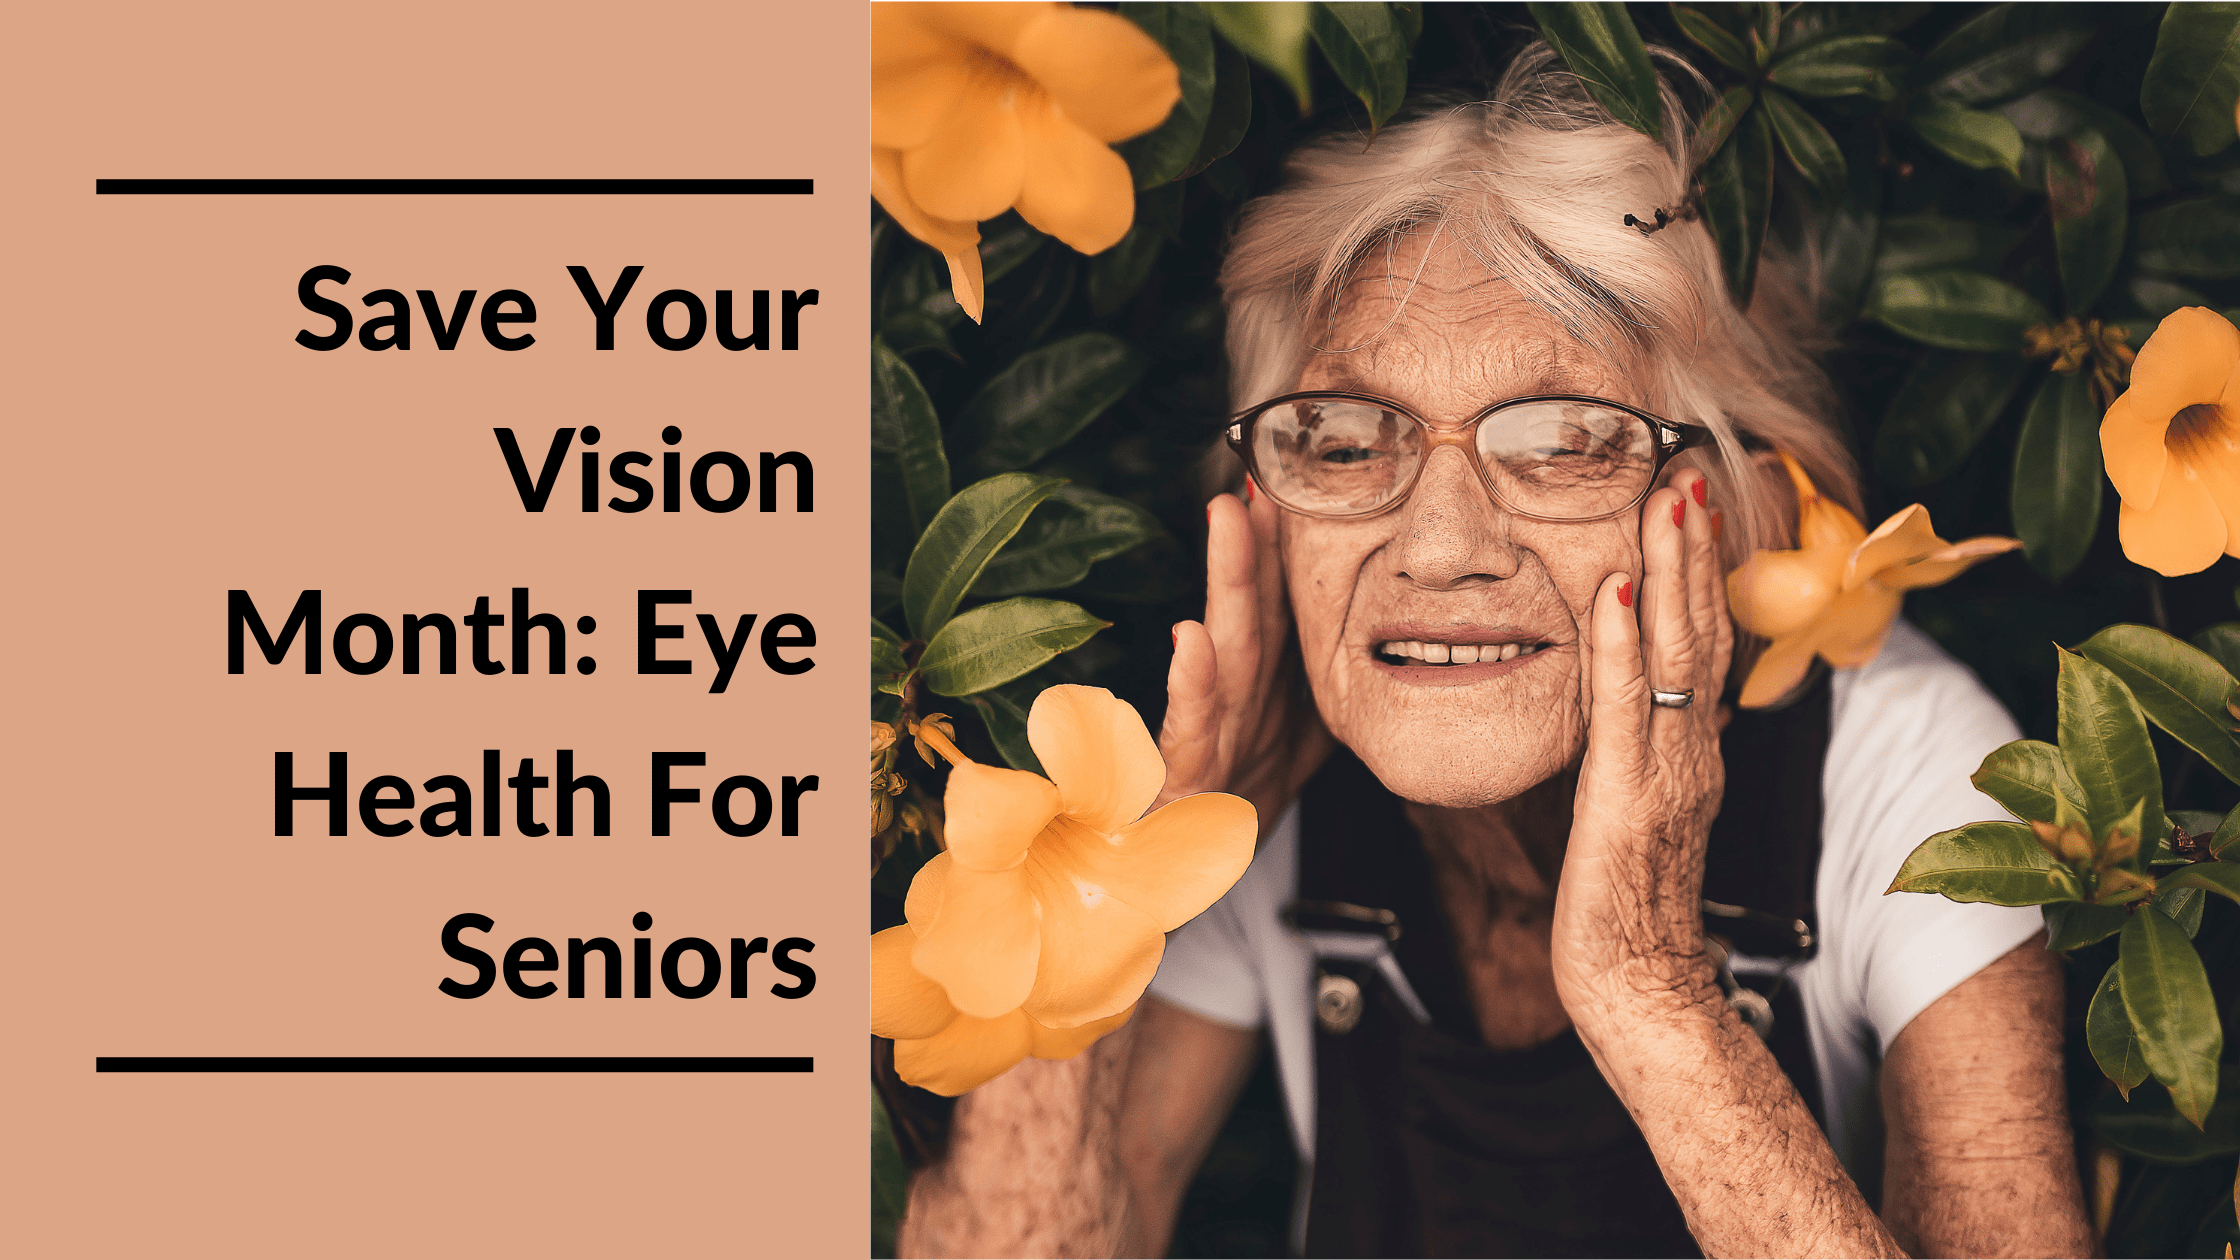 Save Your Vision Month Featured Image